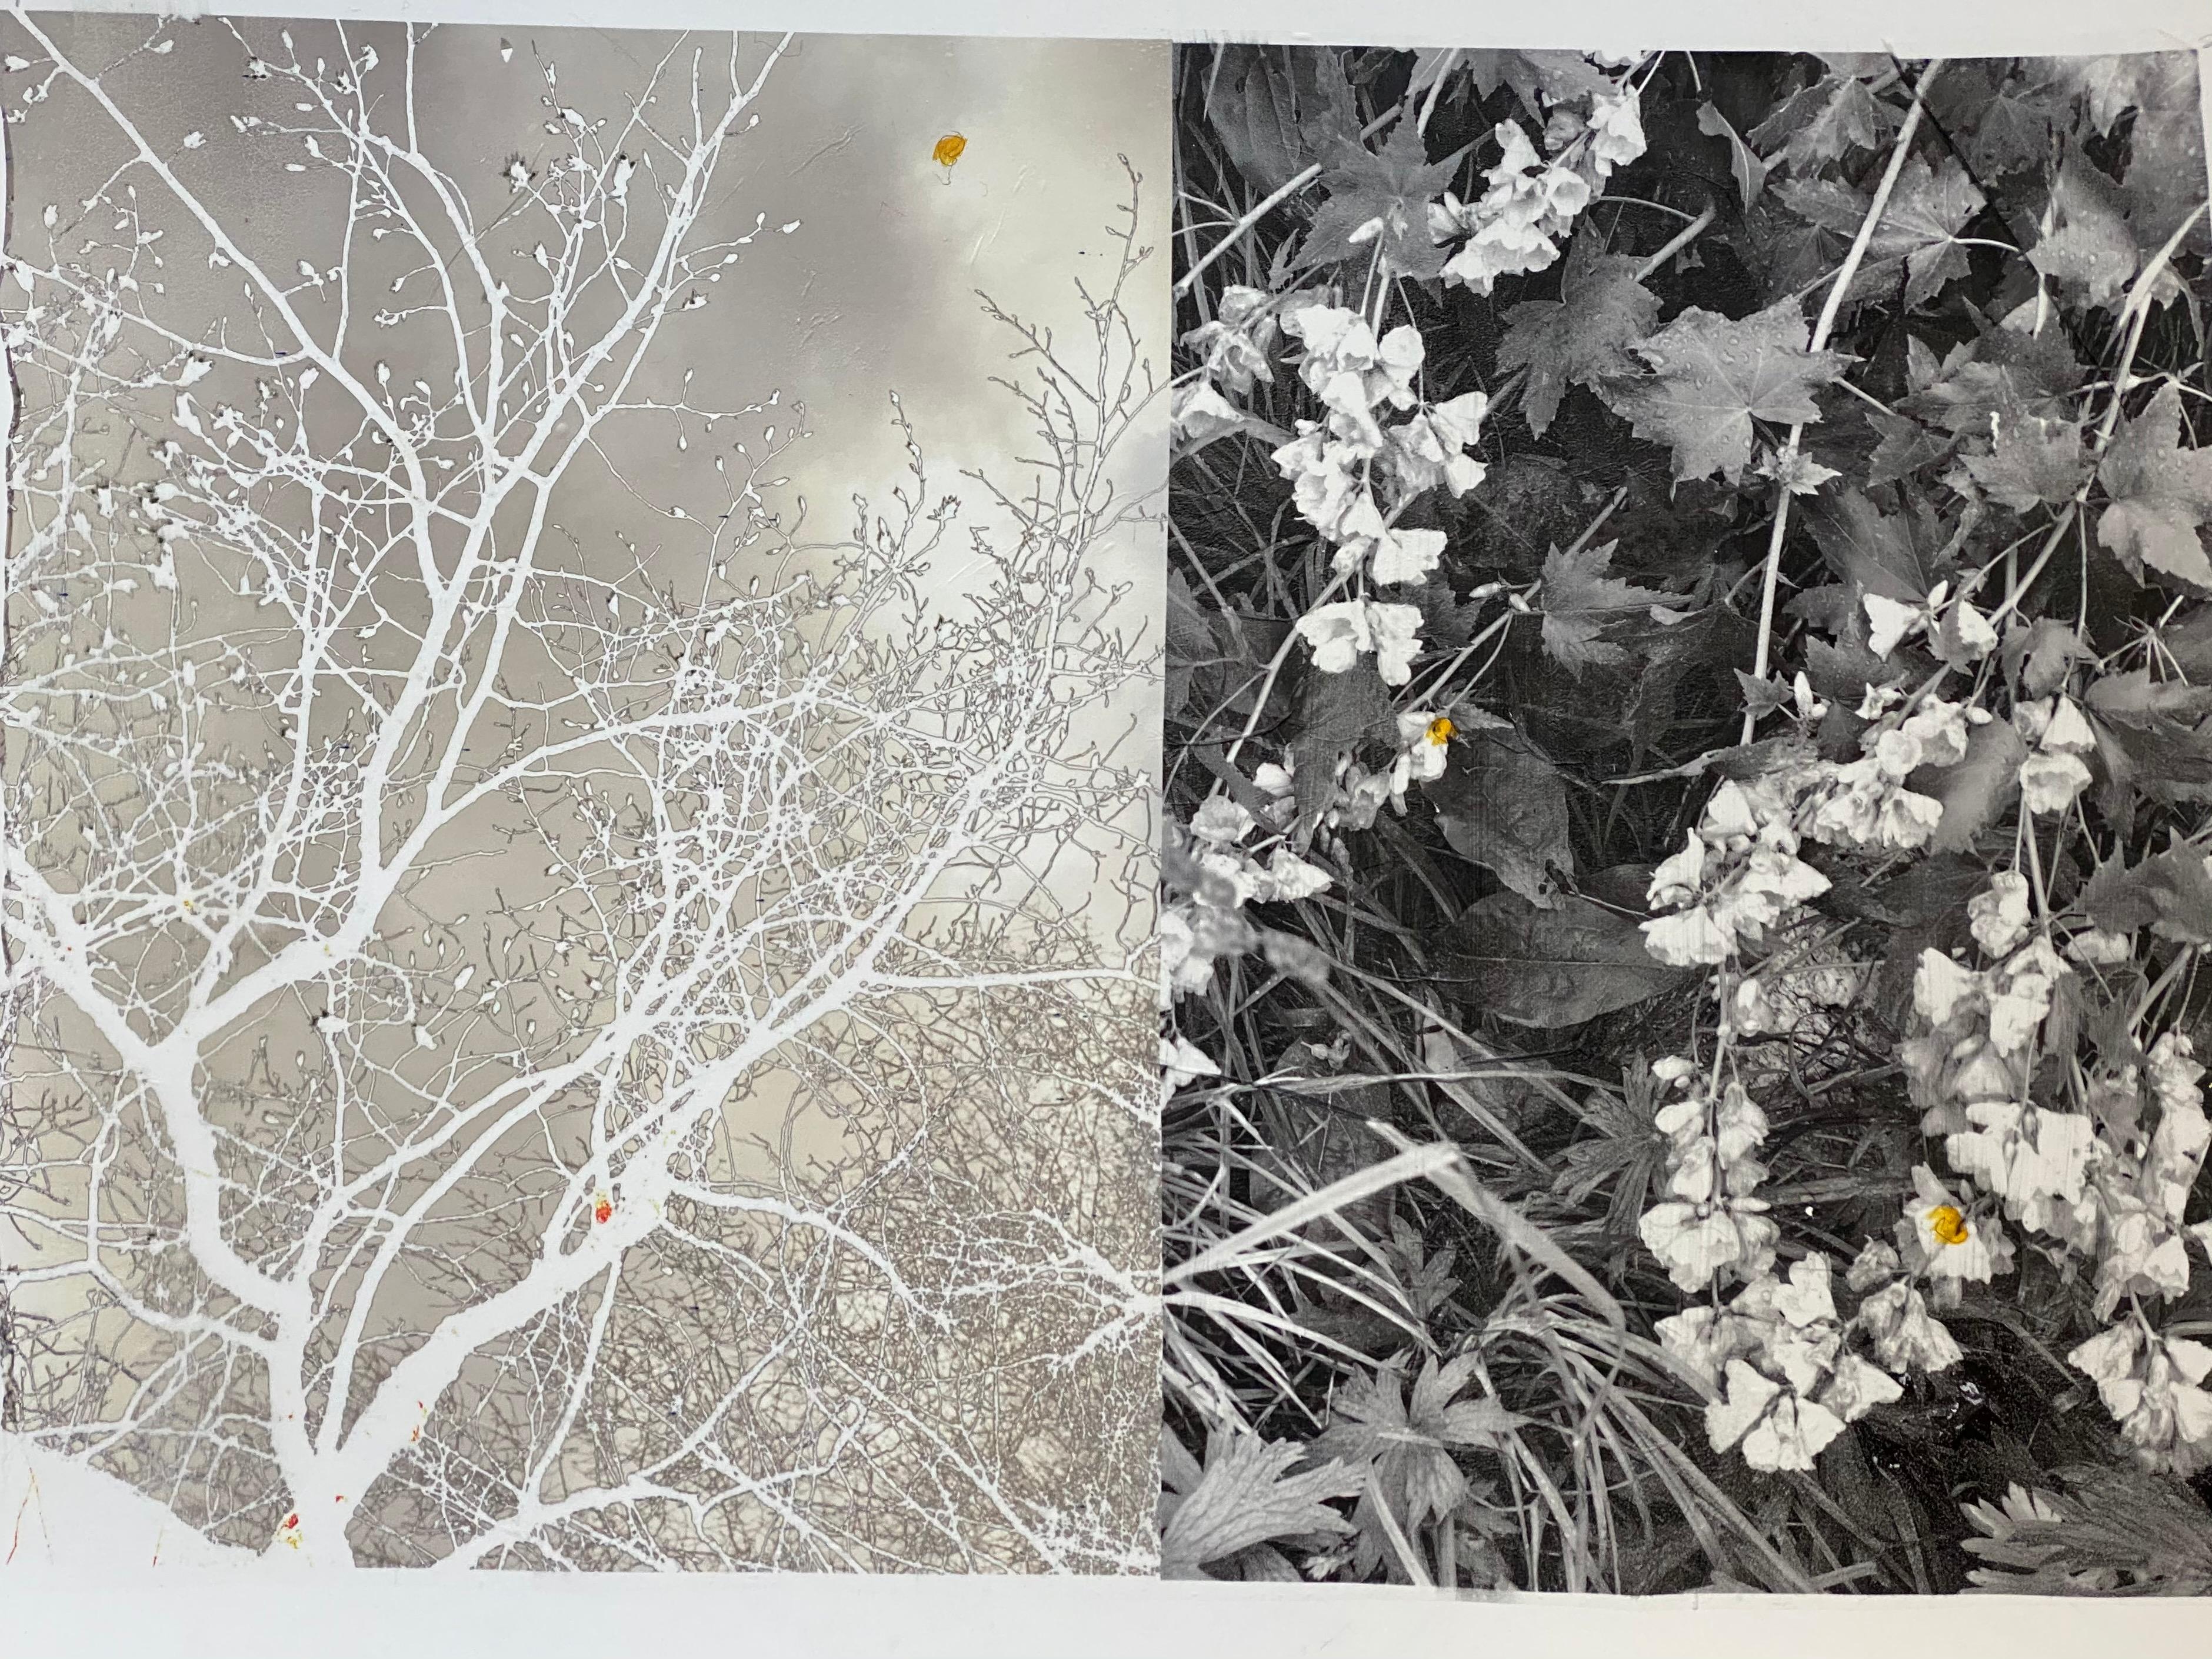 A horizontal black and white landscape photography emulsion transfer of flowers and winter trees by Anne Muller. The emulsion lift features two images, with a winter tree against a cloudy sky on the left, and a close-up view of wildflowers on the